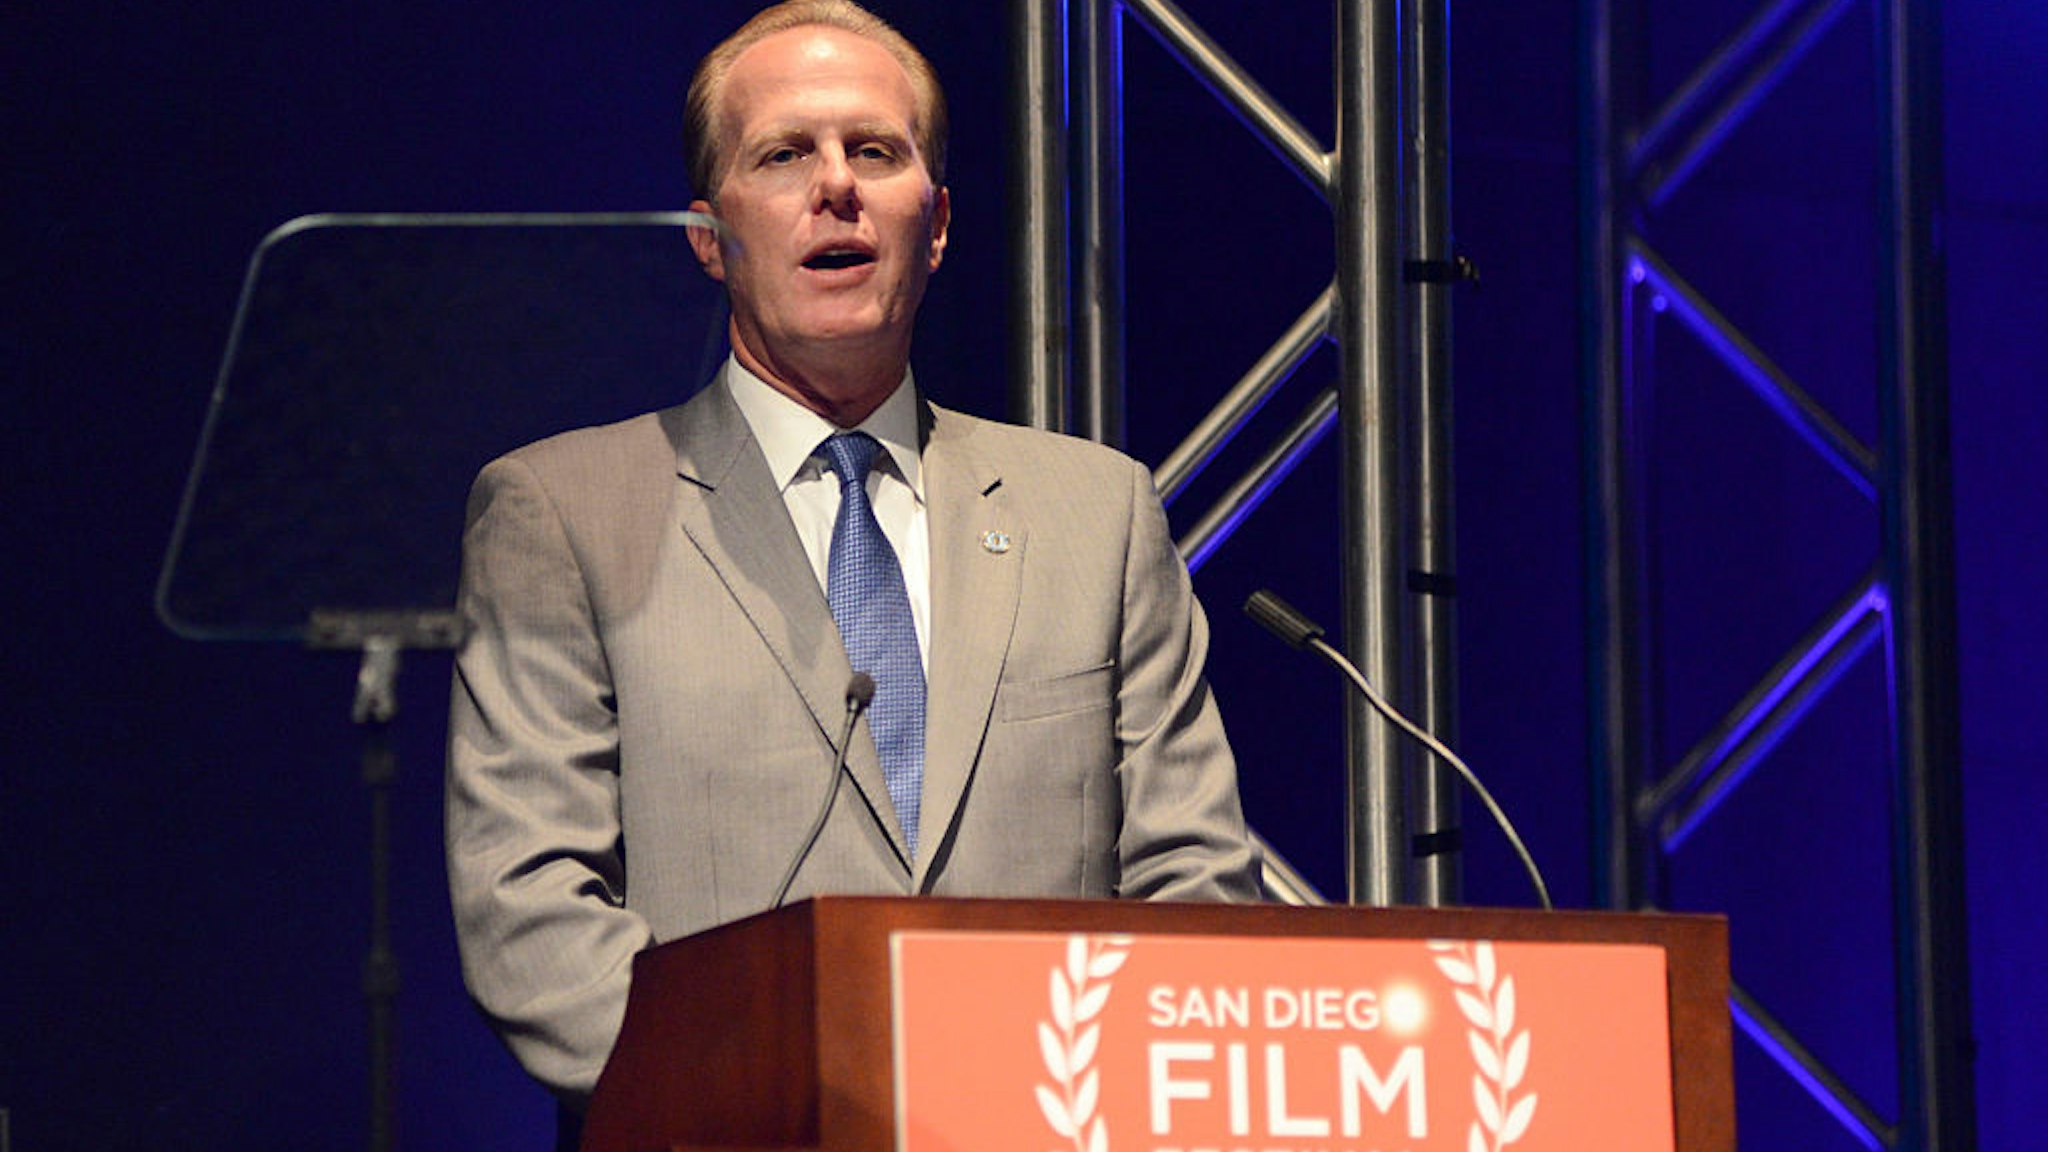 Mayor of San Diego Kevin Faulconer speaks at the opening night tribute at the San Diego Film Festival 2014 on September 27, 2014 in San Diego, California.